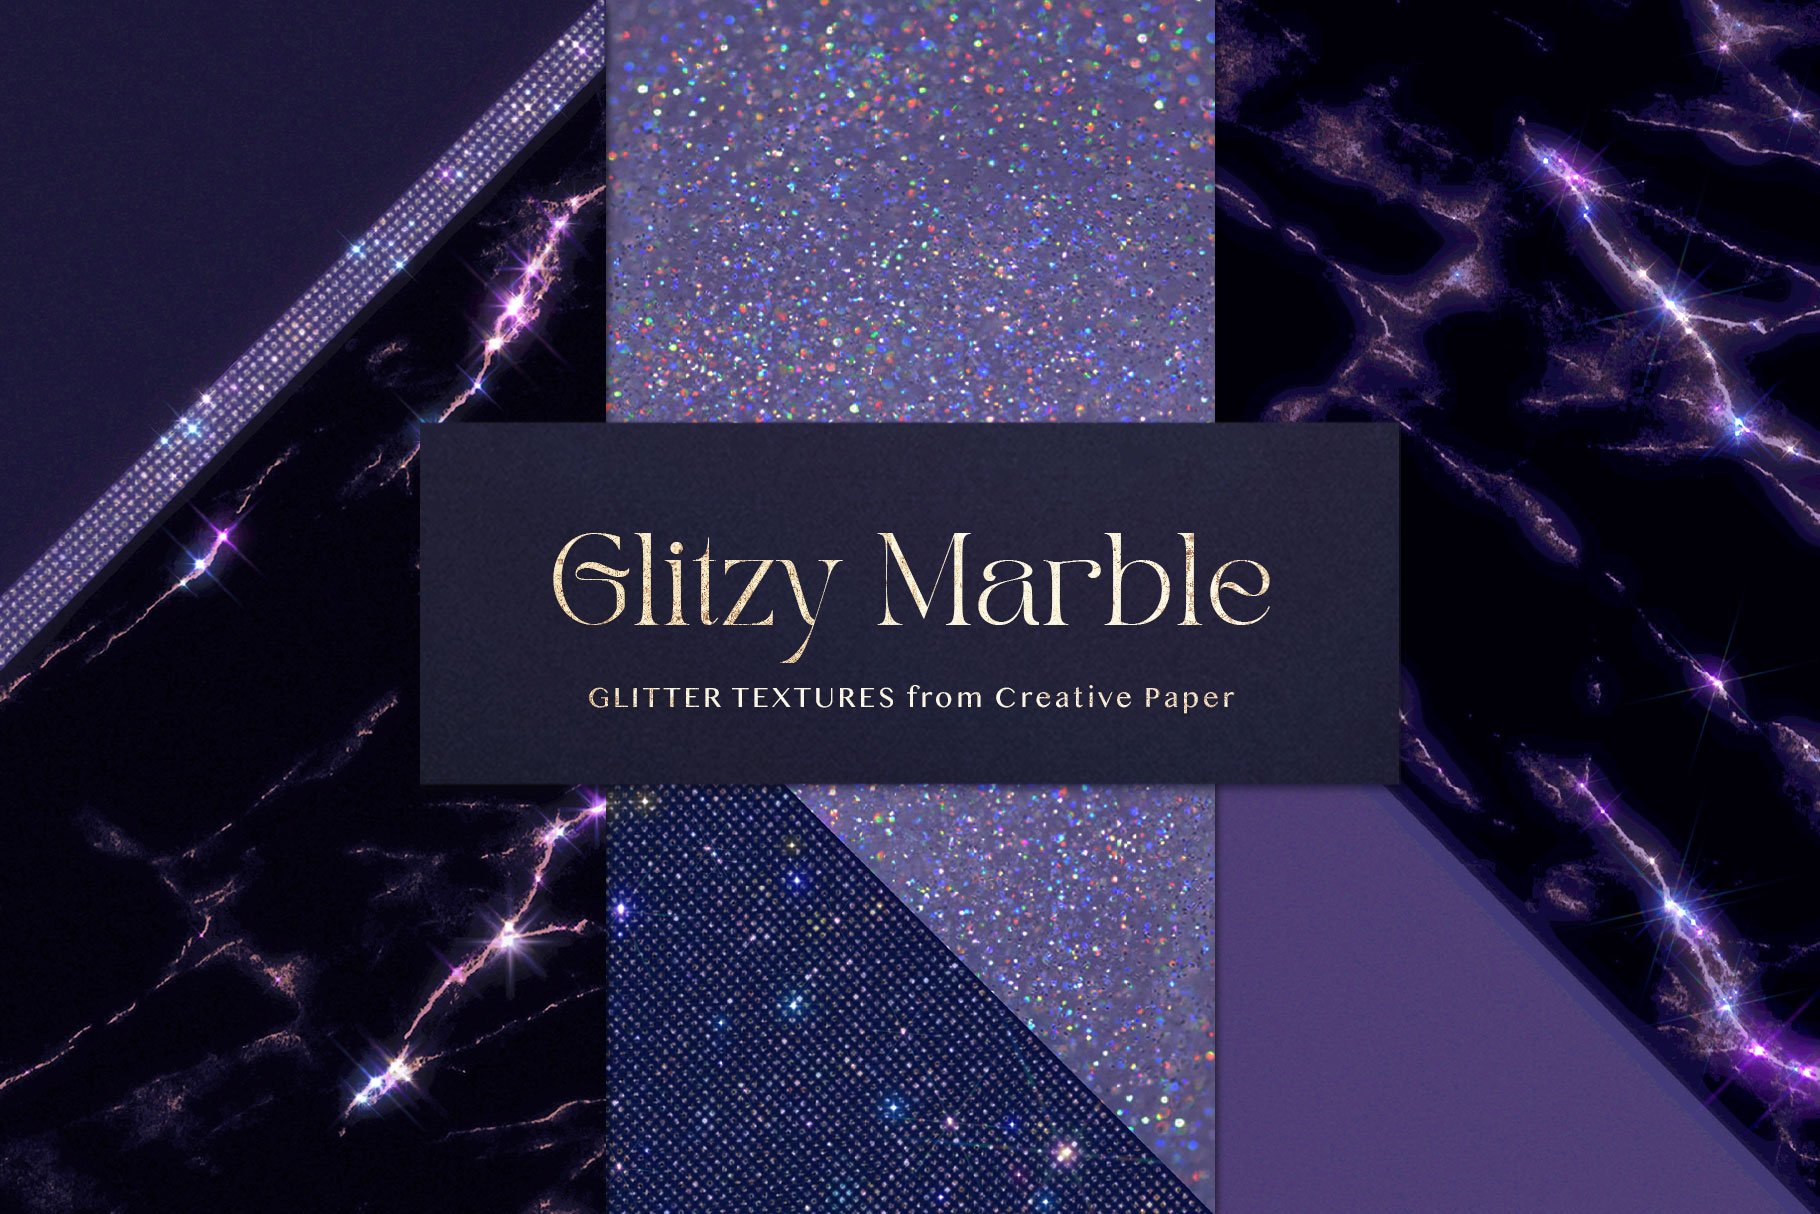 Glitzy Marble Textures cover image.